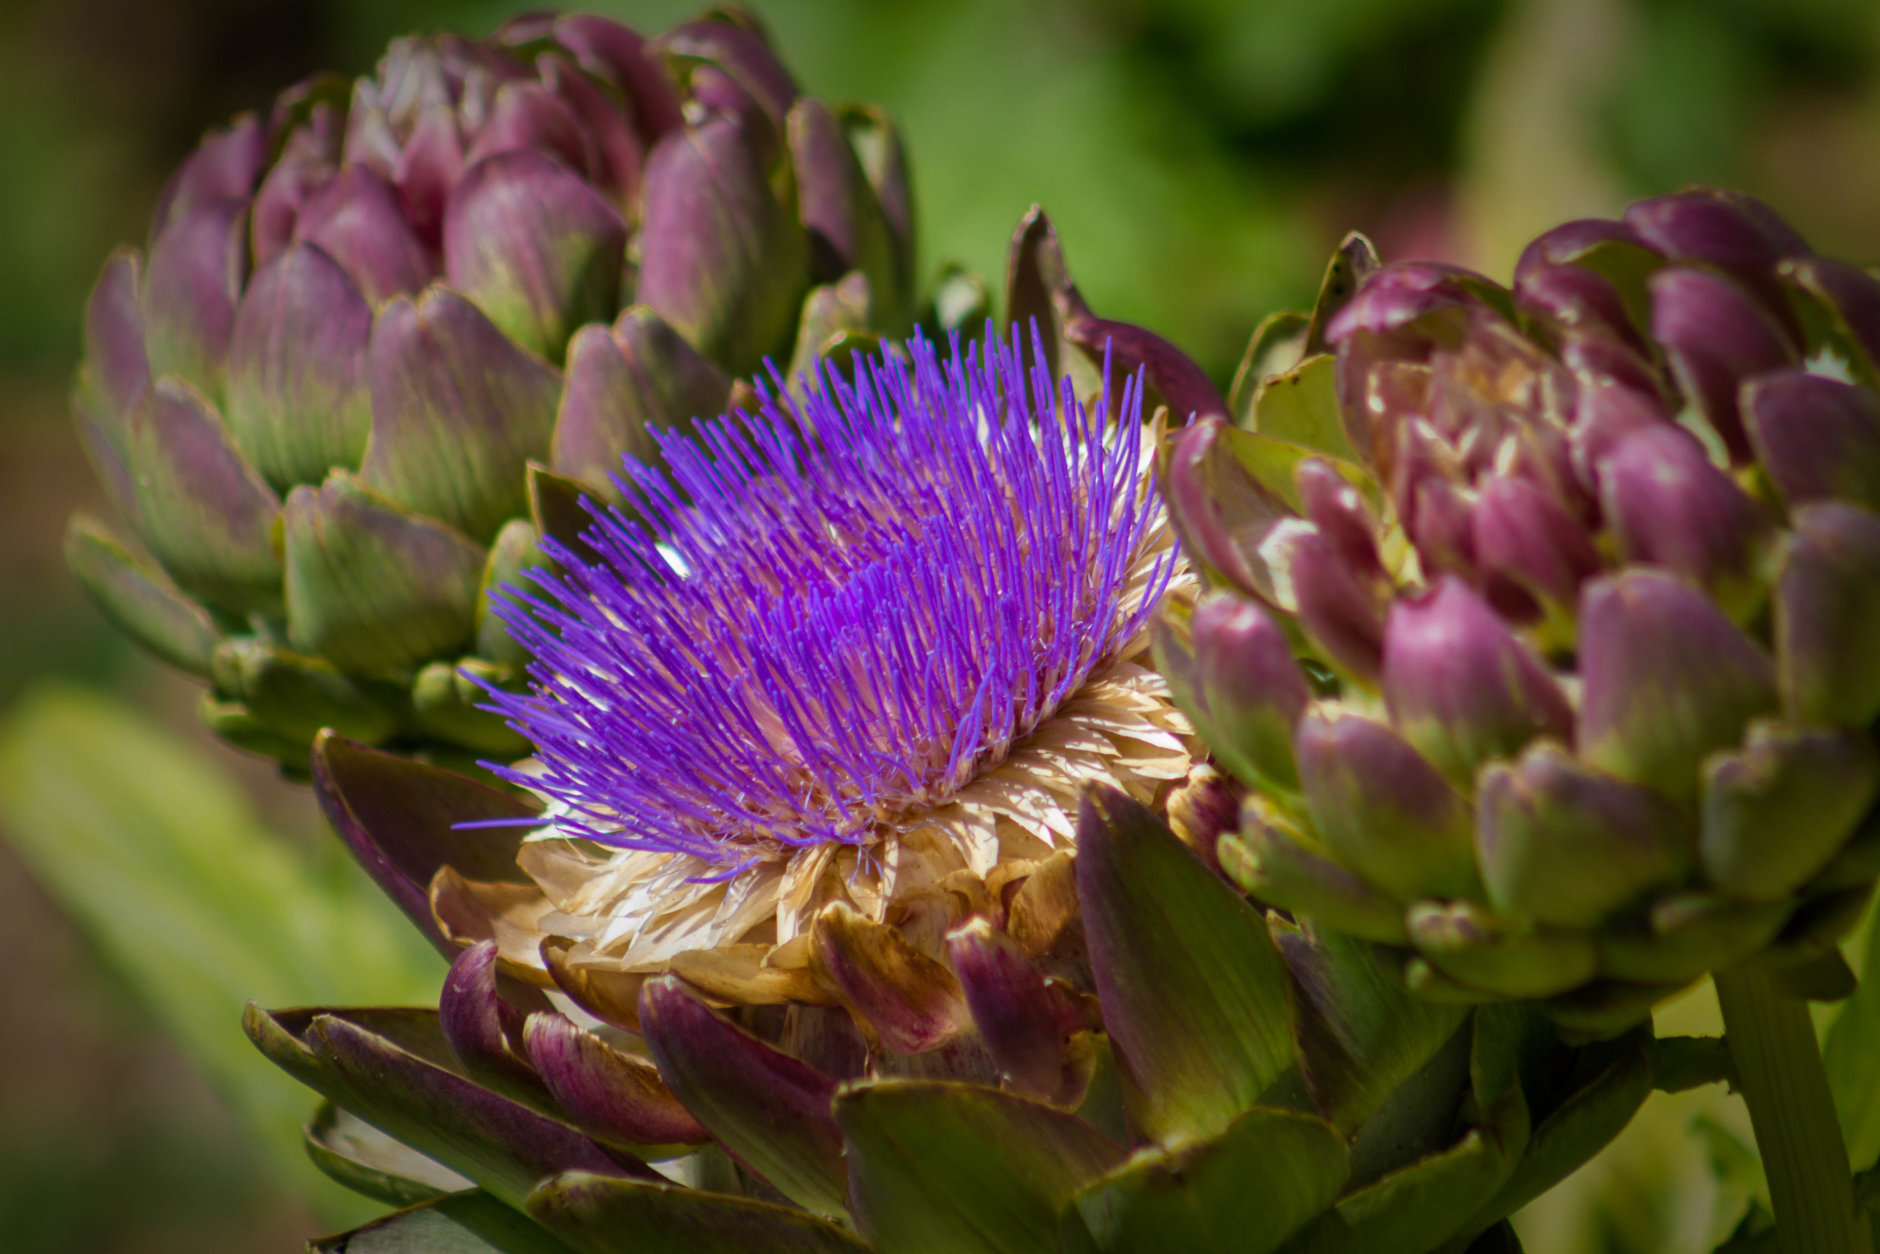 Three Bright and brilliant Artichoke blooms, one with flowering fringed purple top.